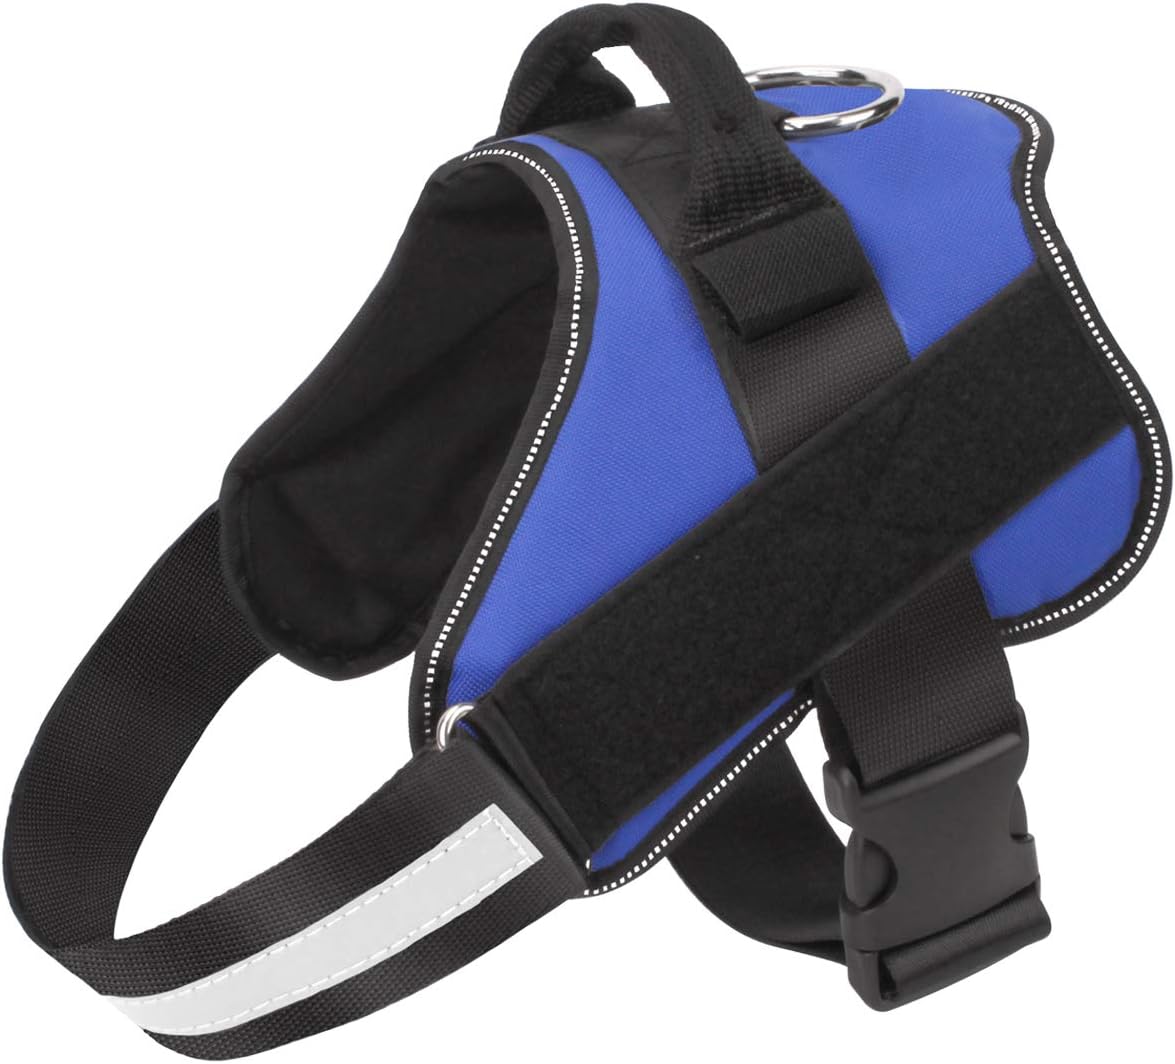 Bolux Dog Harness Review